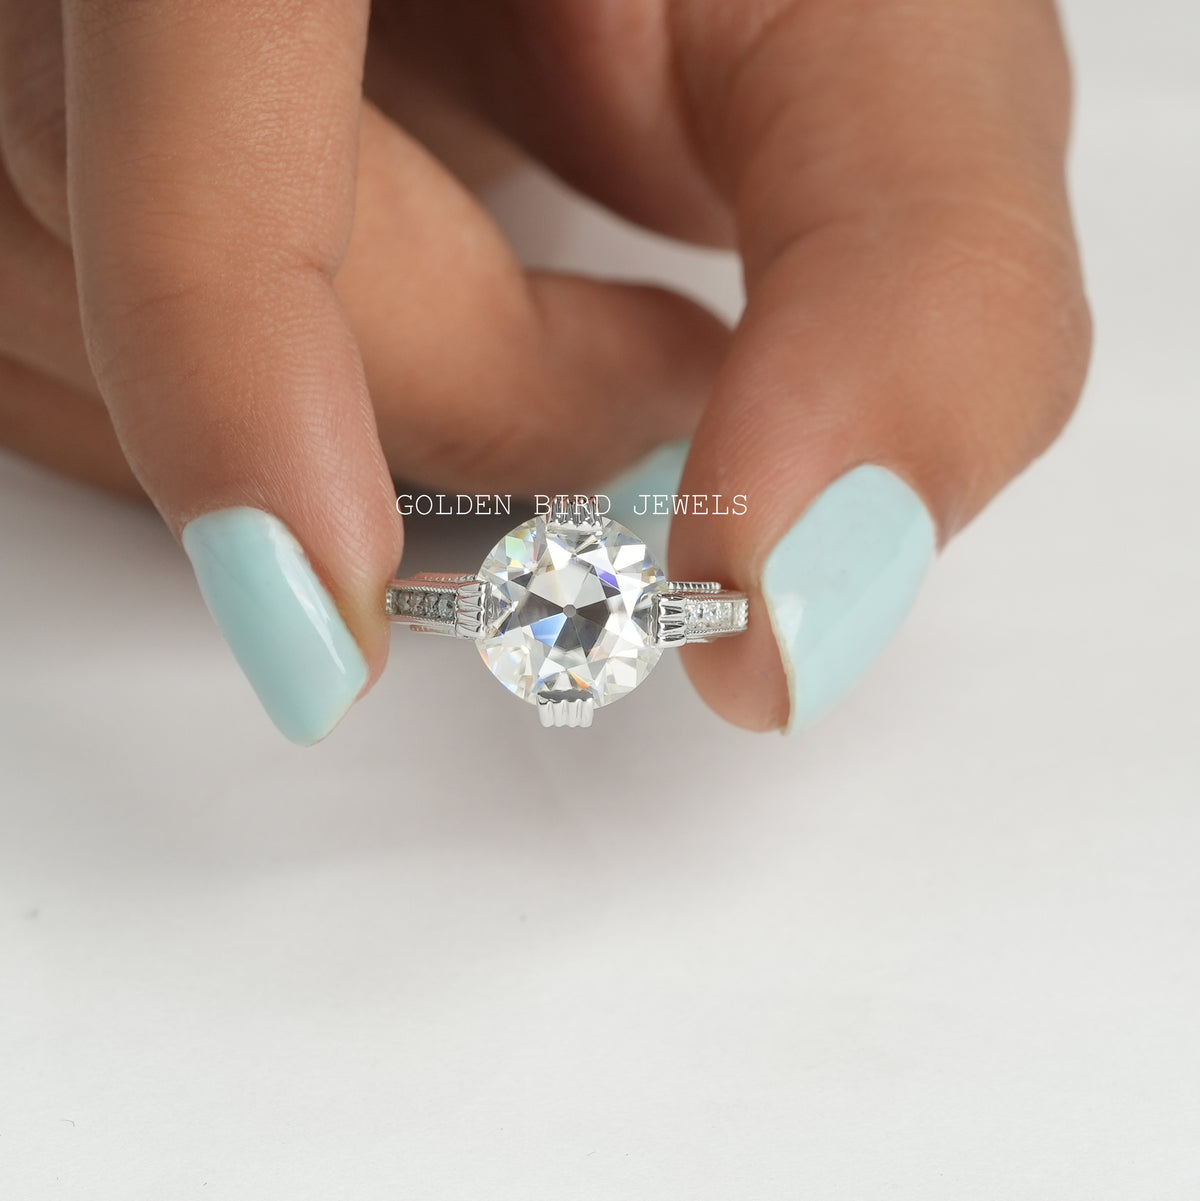 [ A woman's hand holding a moissanite ring with a colorless round cut stone]-[Golden Bird Jewels]